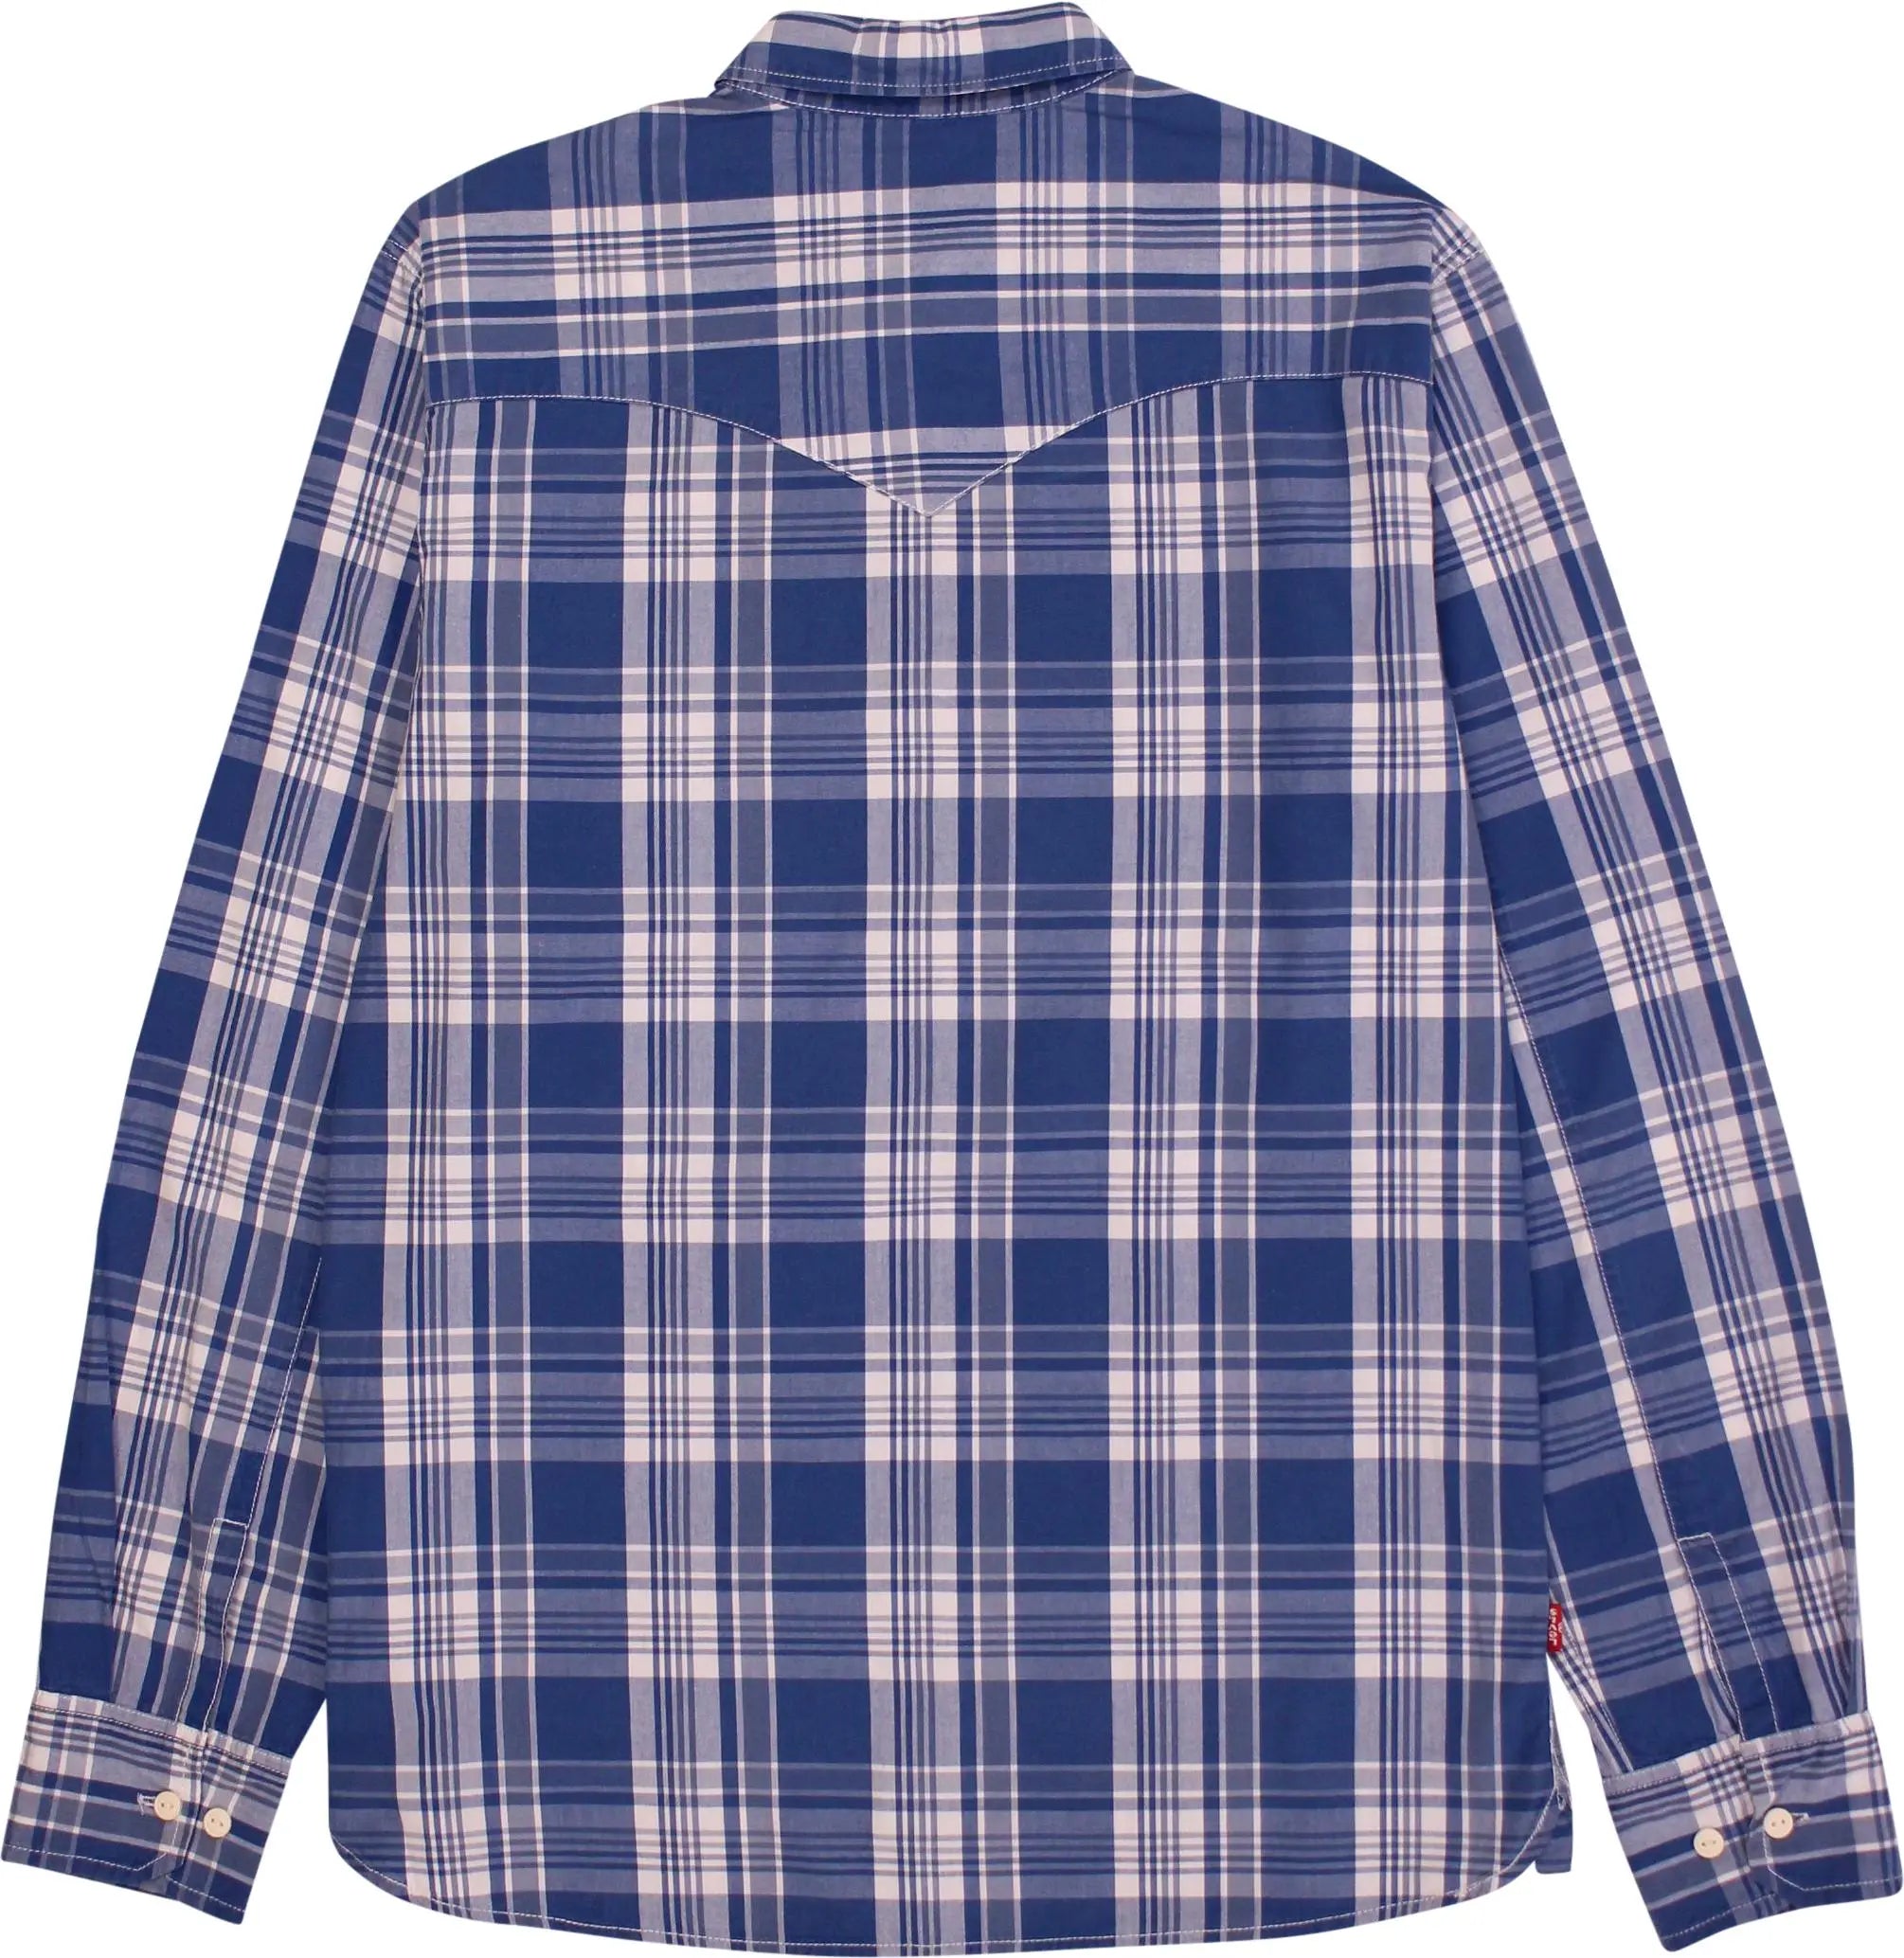 Levi's - Blue Checked Shirt by Levi's- ThriftTale.com - Vintage and second handclothing